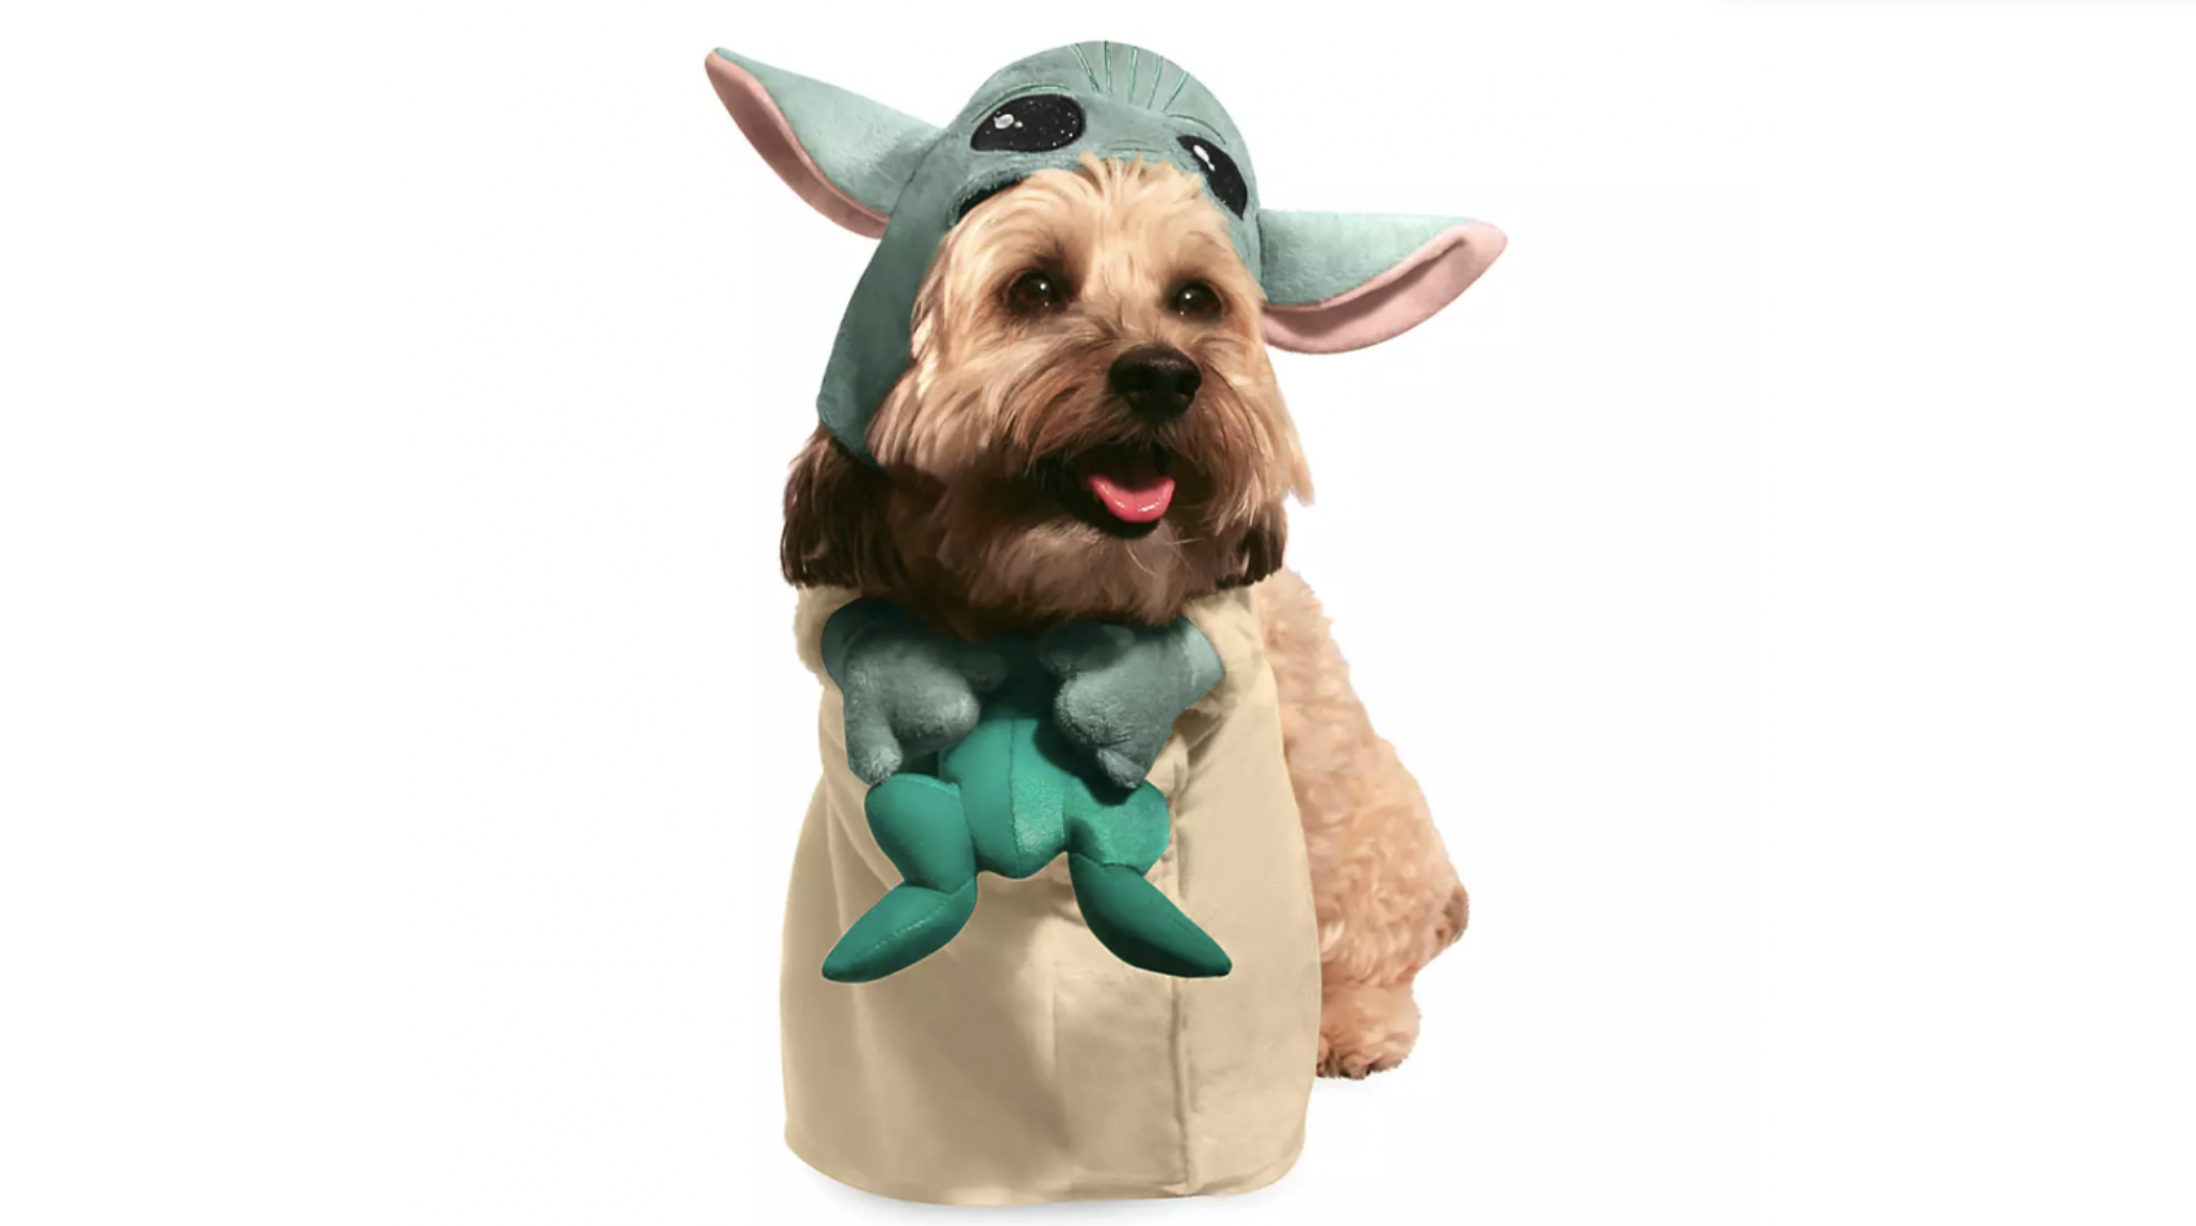 Your Furry Friend Can Dress Up as Baby Yoda (and Much More) for Halloween!